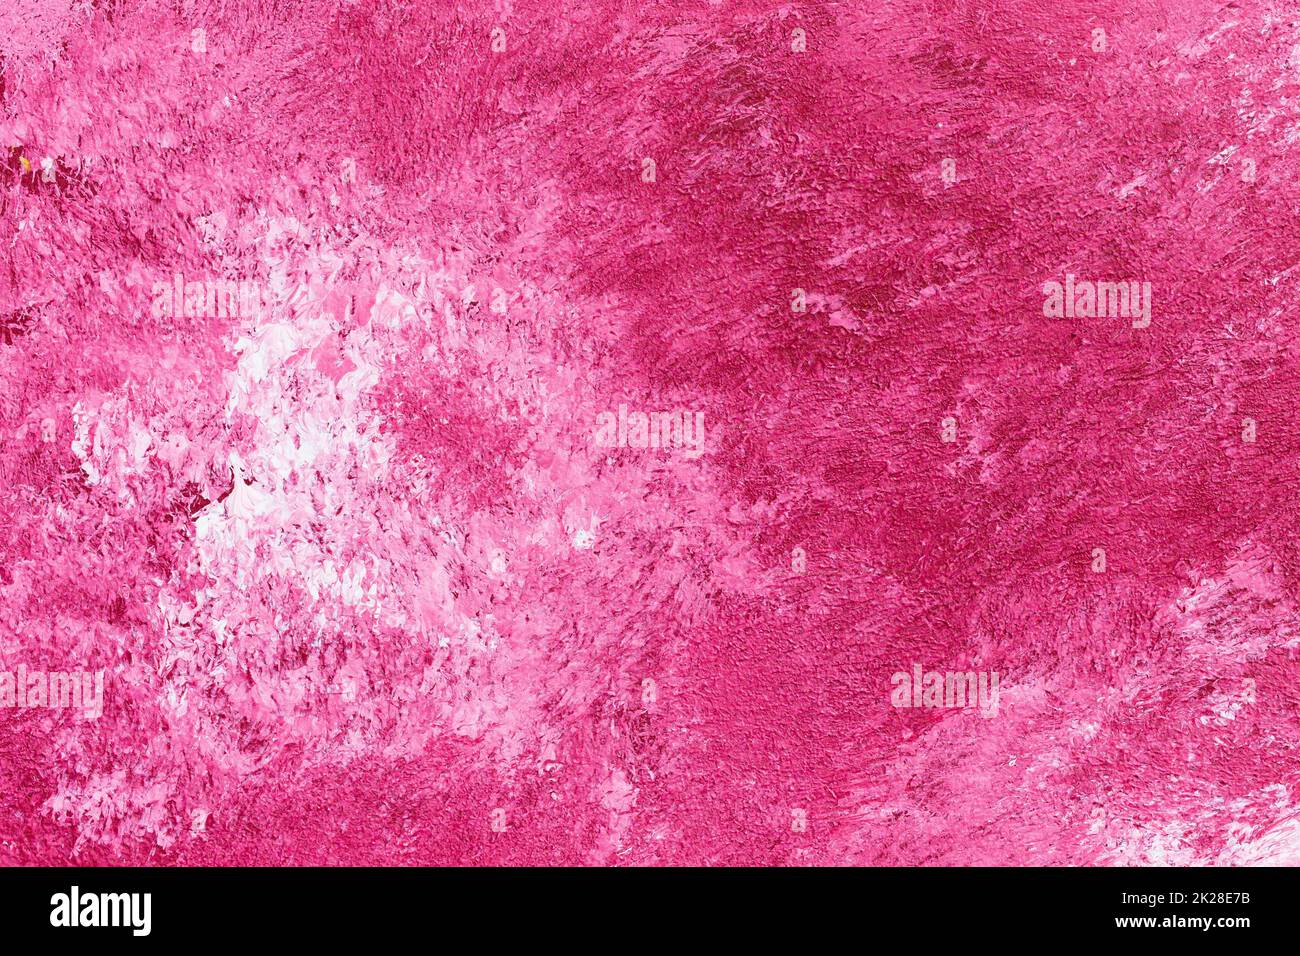 abstract pink background texture concrete wall Stock Photo